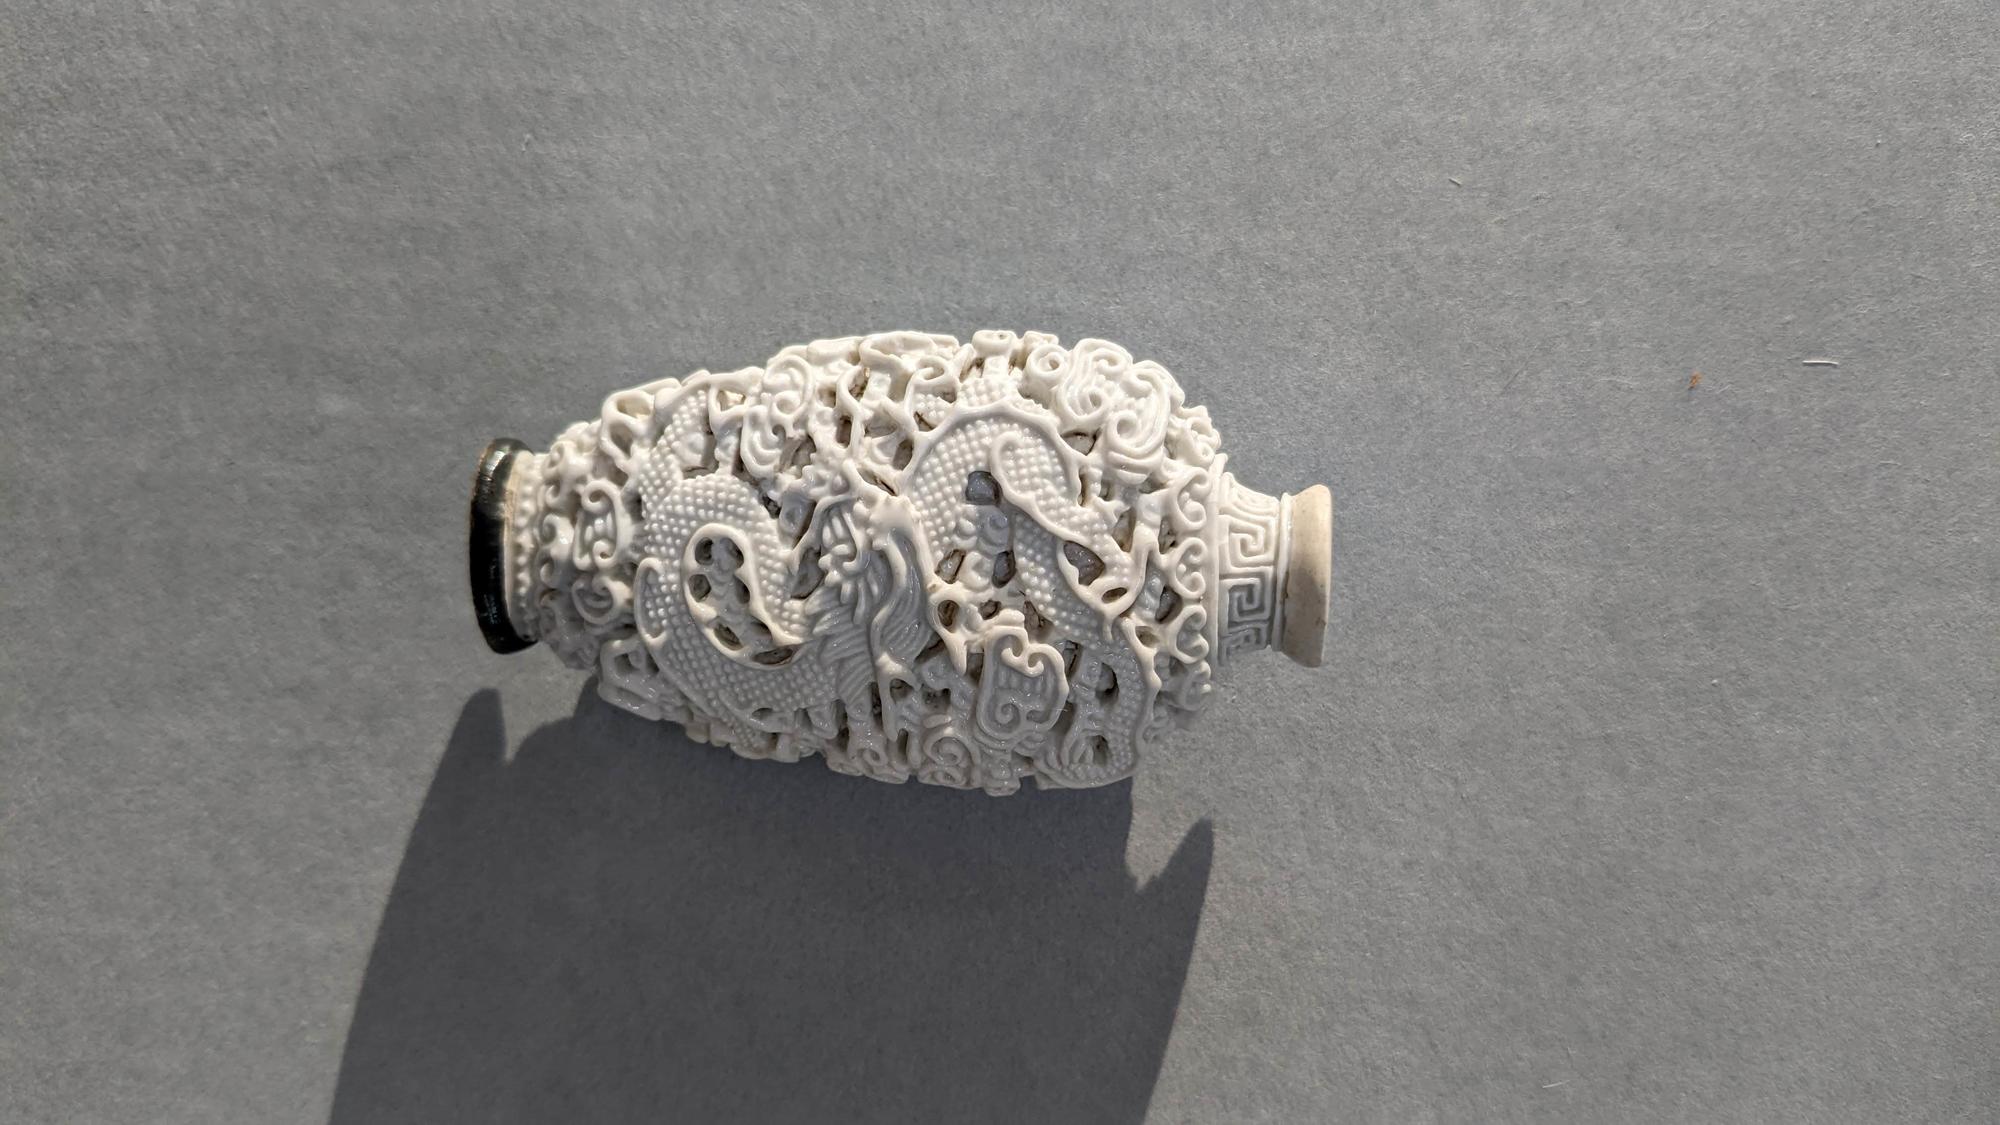 An oval-shaped white porcelain snuff bottle. Dramatic lighting from the left side of the bottle, highlights the deep and intricate carving of the dragon and clouds in the porcelain. 